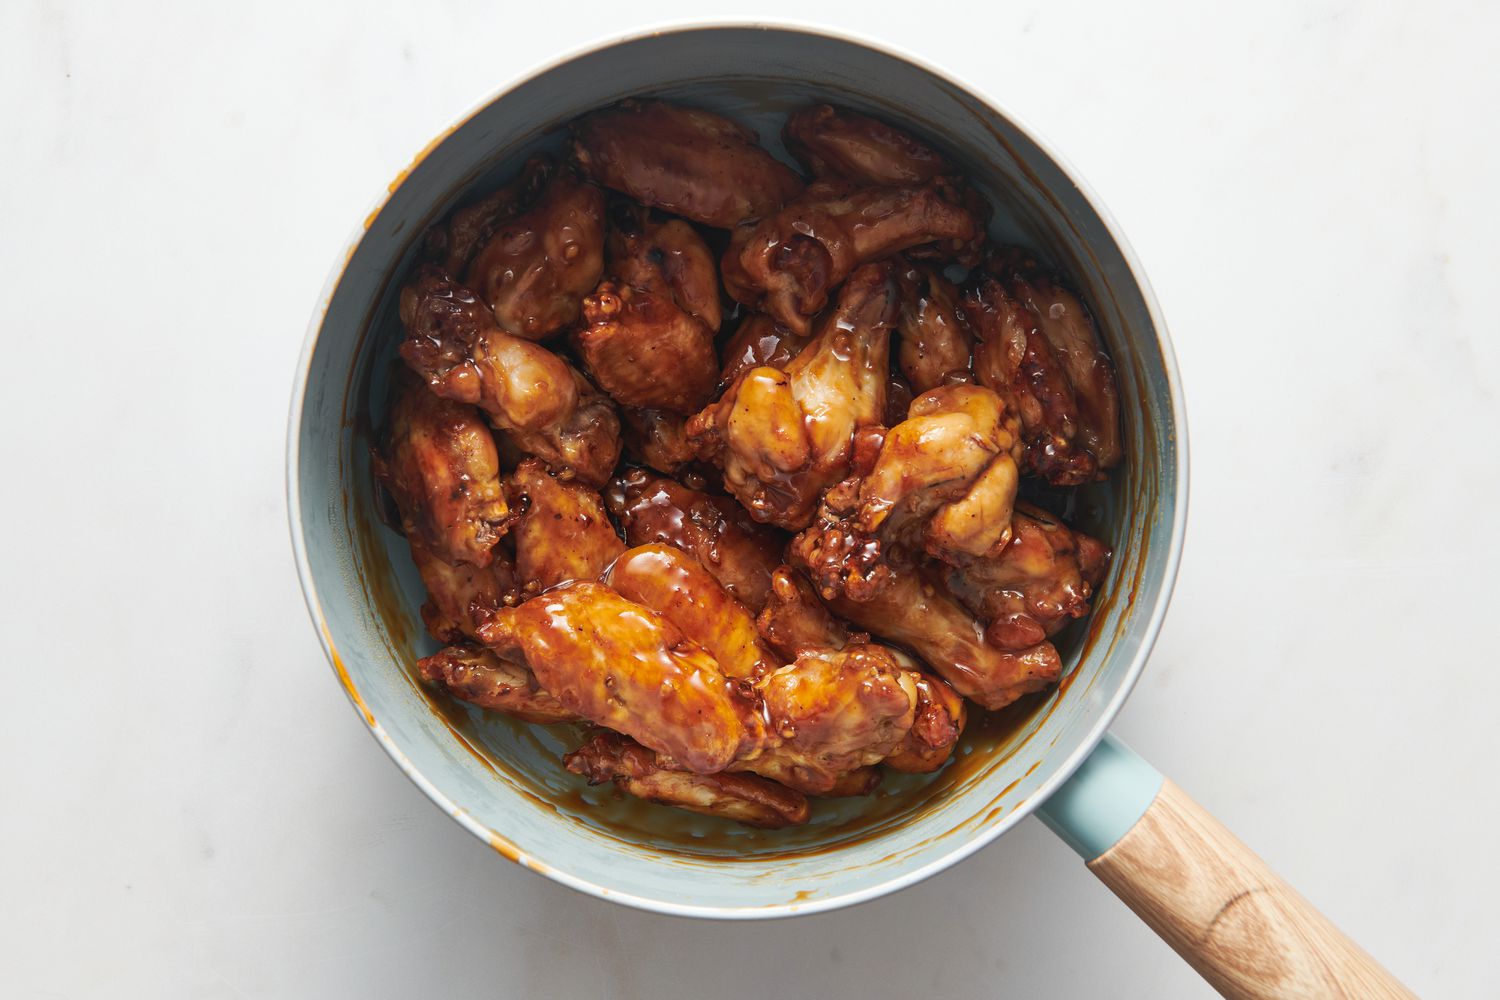 A pan of cooked chicken wings tossed in honey-garlic sauce